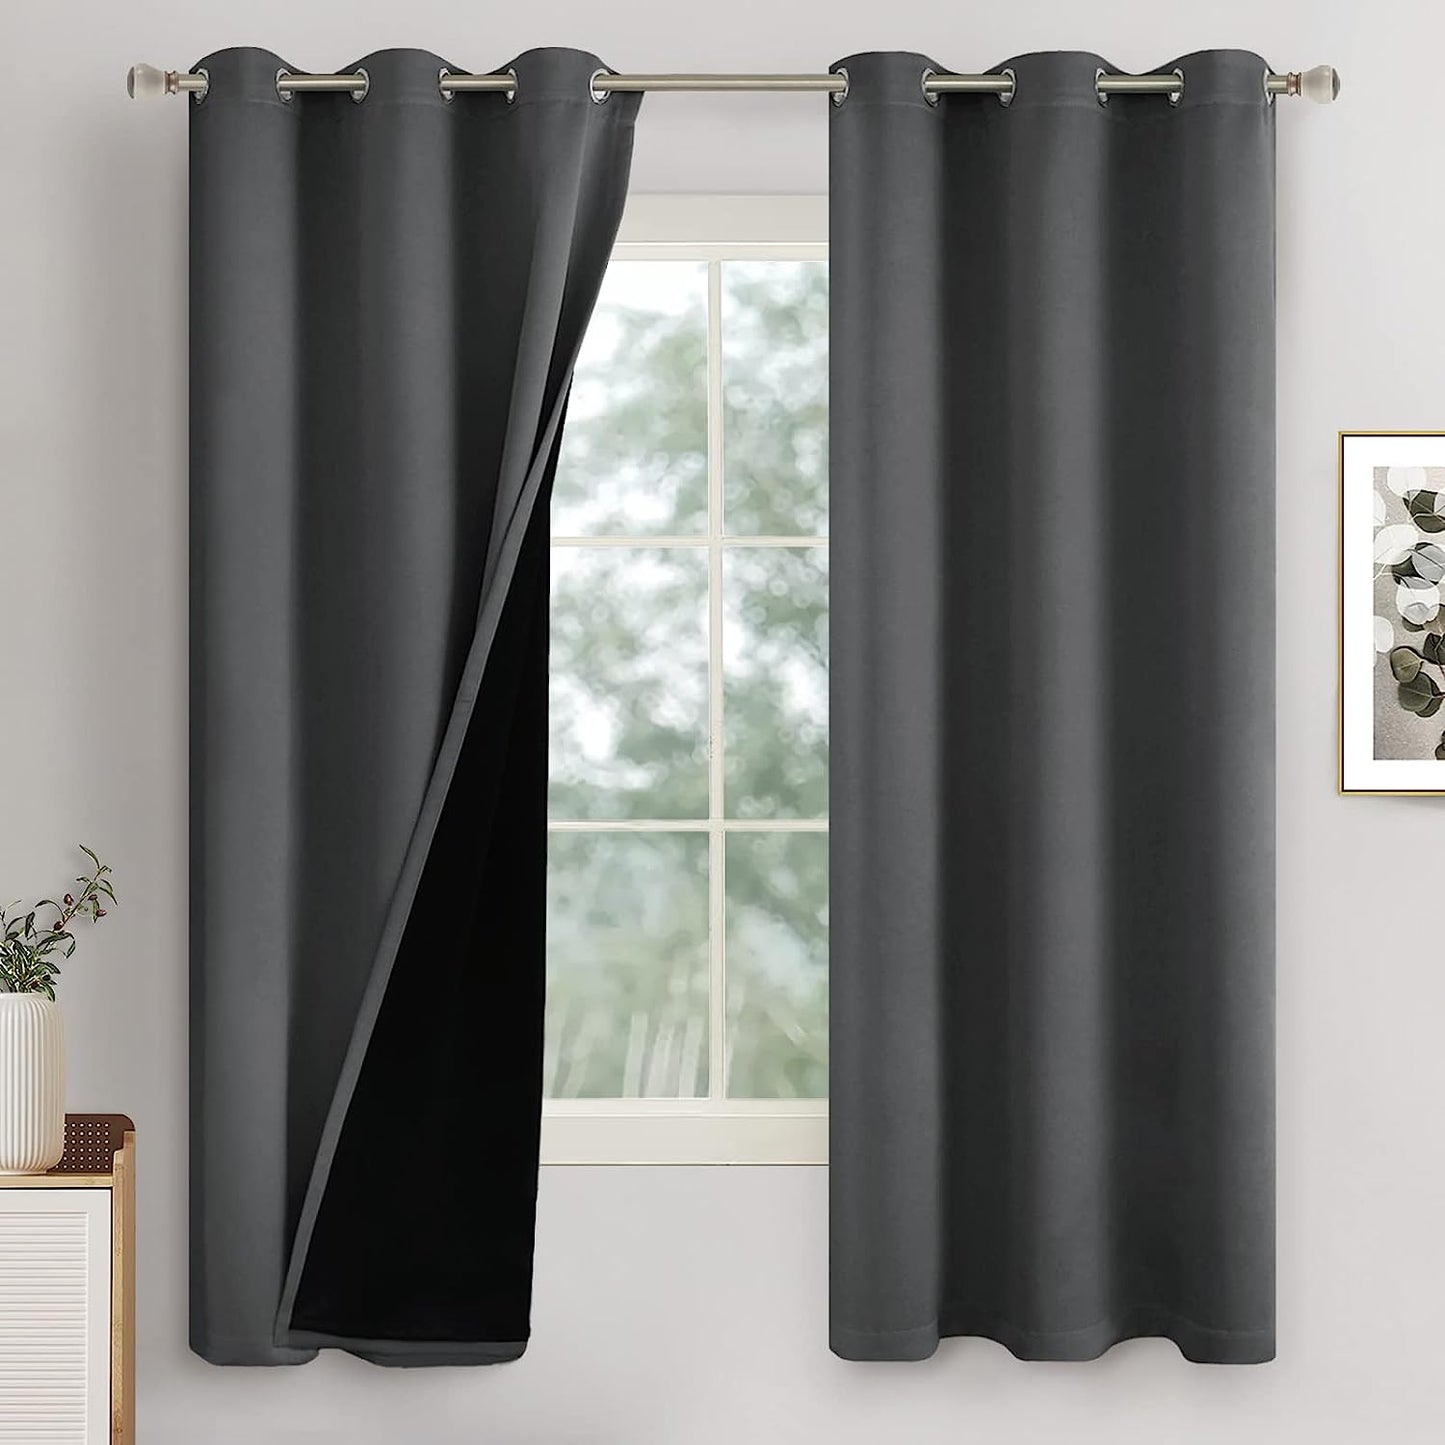 QUEMAS Short Blackout Curtains 54 Inch Length 2 Panels, 100% Light Blocking Thermal Insulated Soundproof Grommet Small Window Curtains for Bedroom Basement with Black Liner, Each 42 Inch Wide, White  QUEMAS Dark Grey + Black Lining W42 X L45 